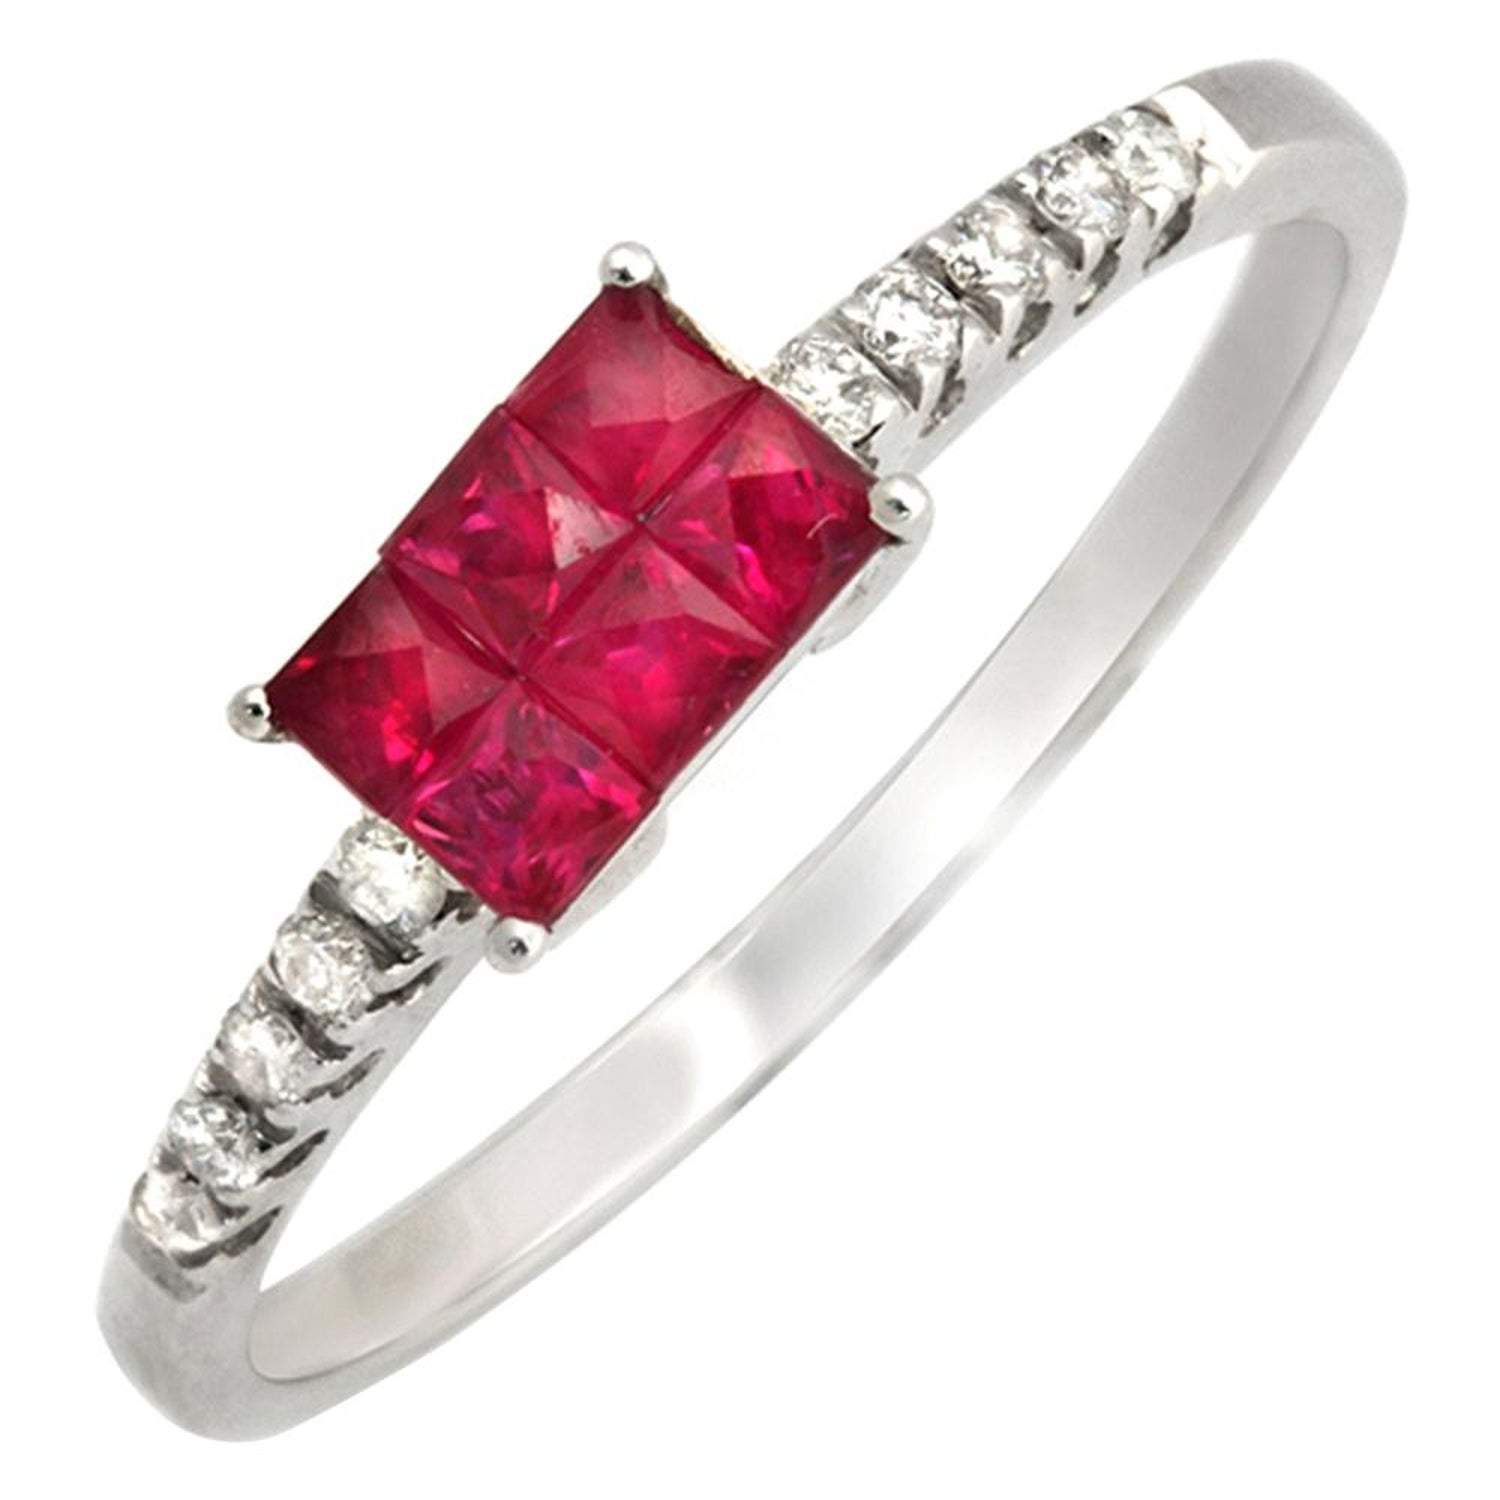 0.75Ct Princess Cut Pink Ruby And Diamond Wedding Band Ring 14K White Gold Over